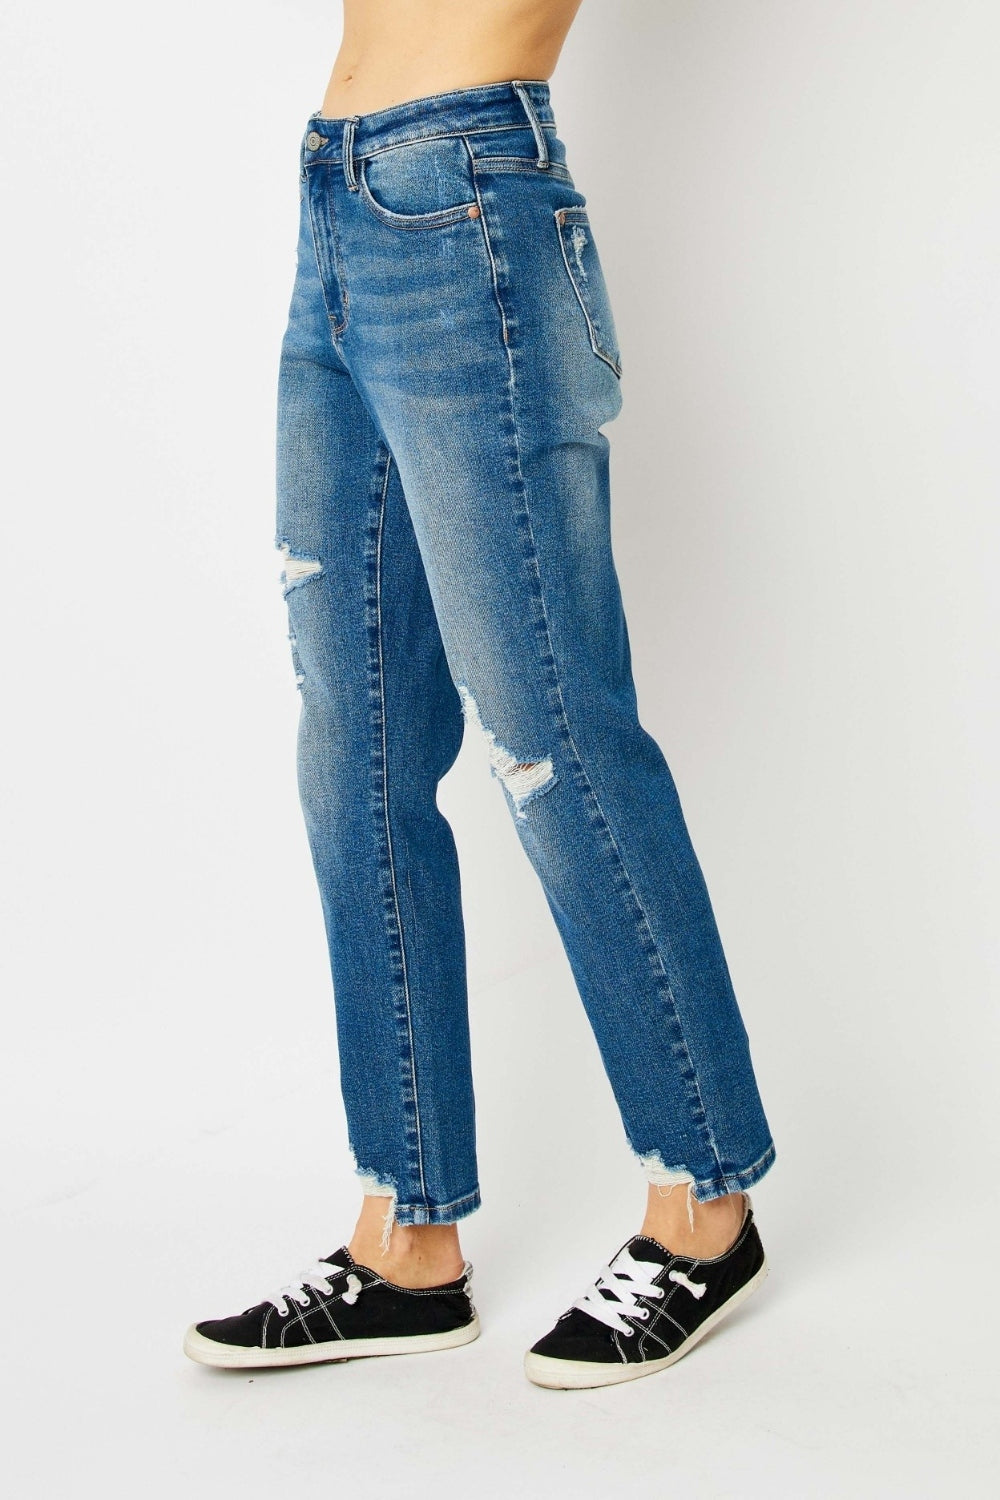 Queen Of Hearts Coin Pocket BF Jeans